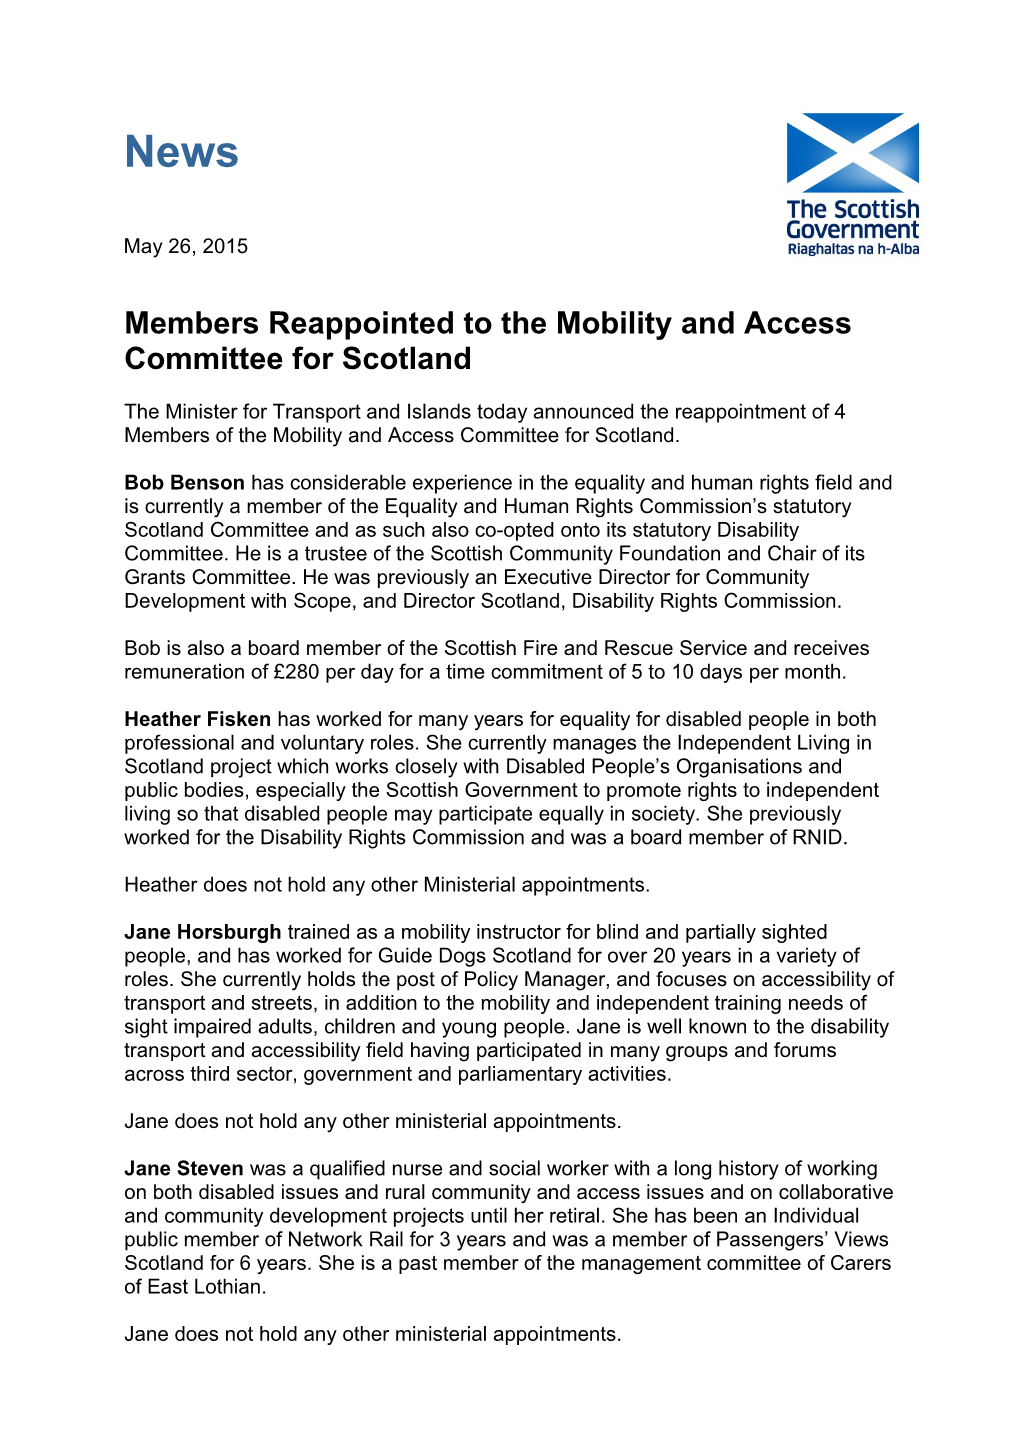 Members Reappointed to the Mobility and Access Committee for Scotland